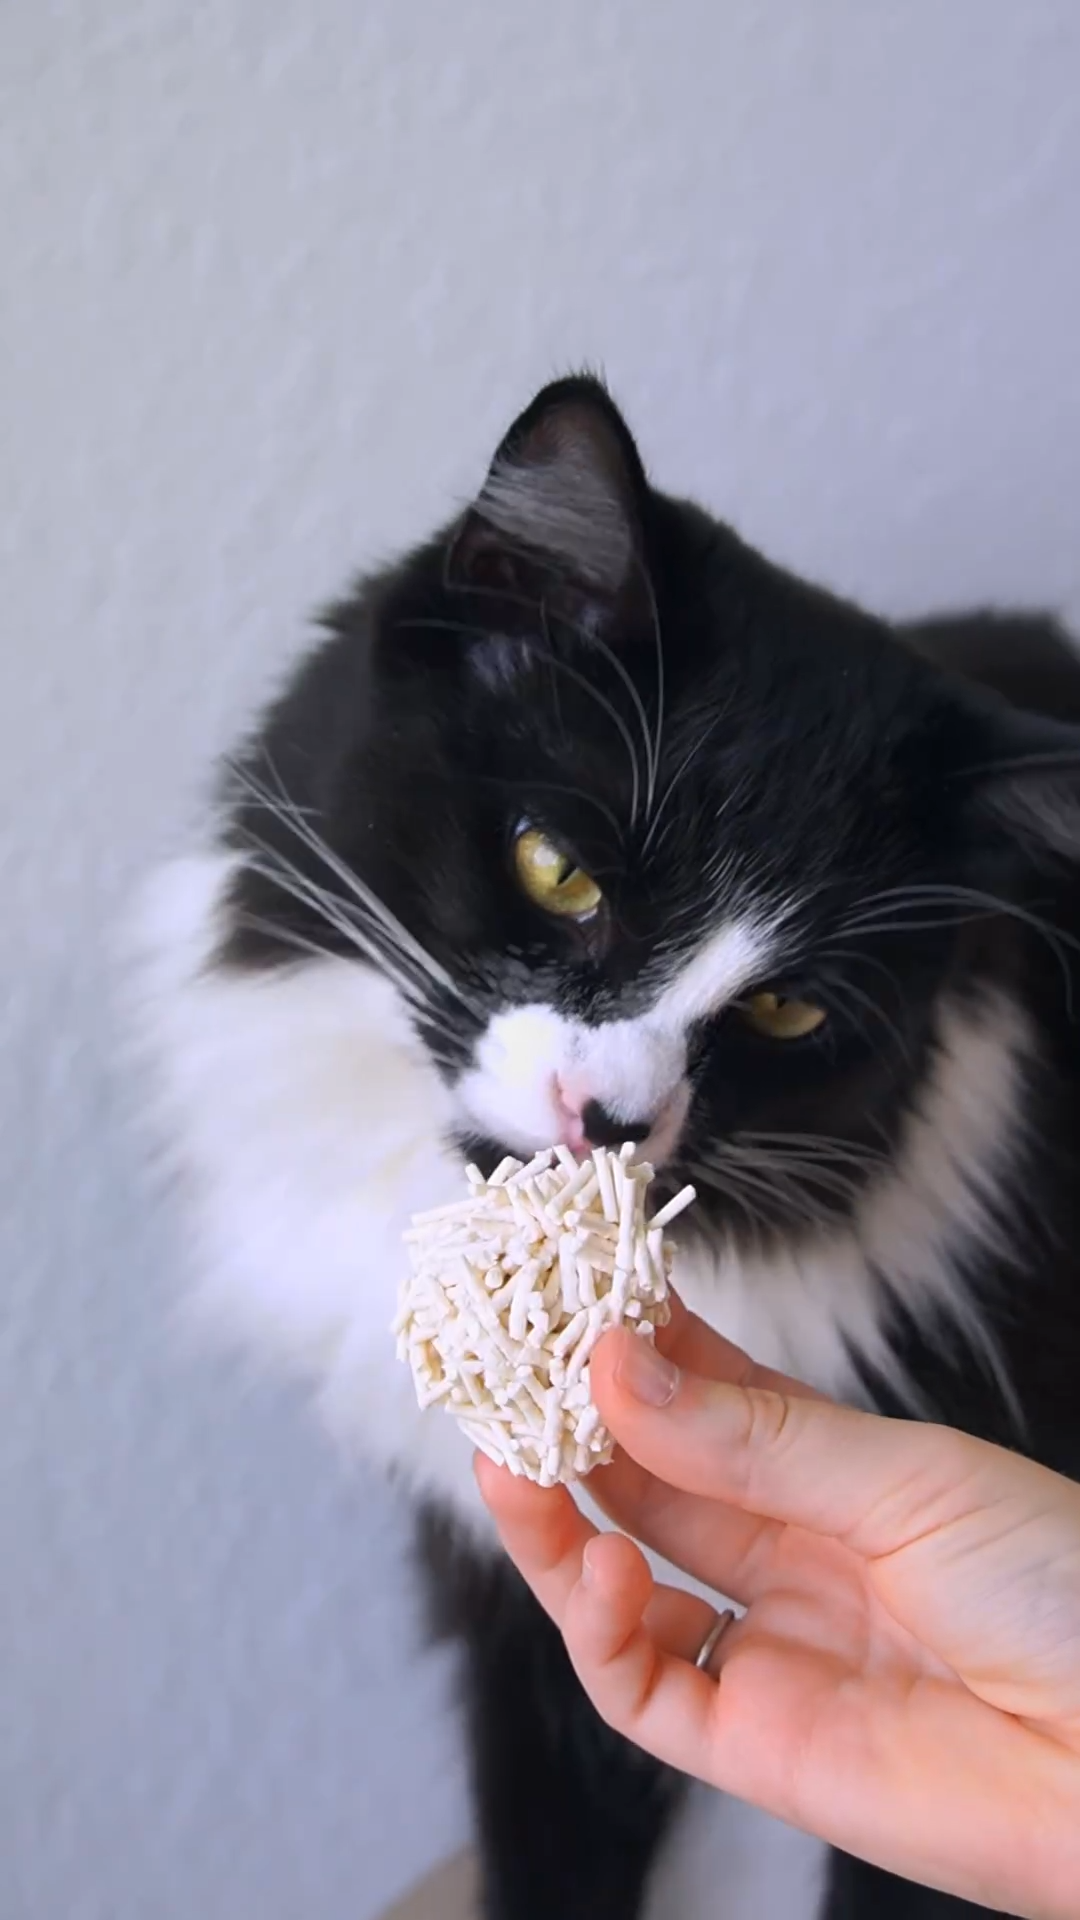 Is Tofu Cat Litter Edible for Cats? Discover the Truth About Safe and Eco-Friendly Cat Litter